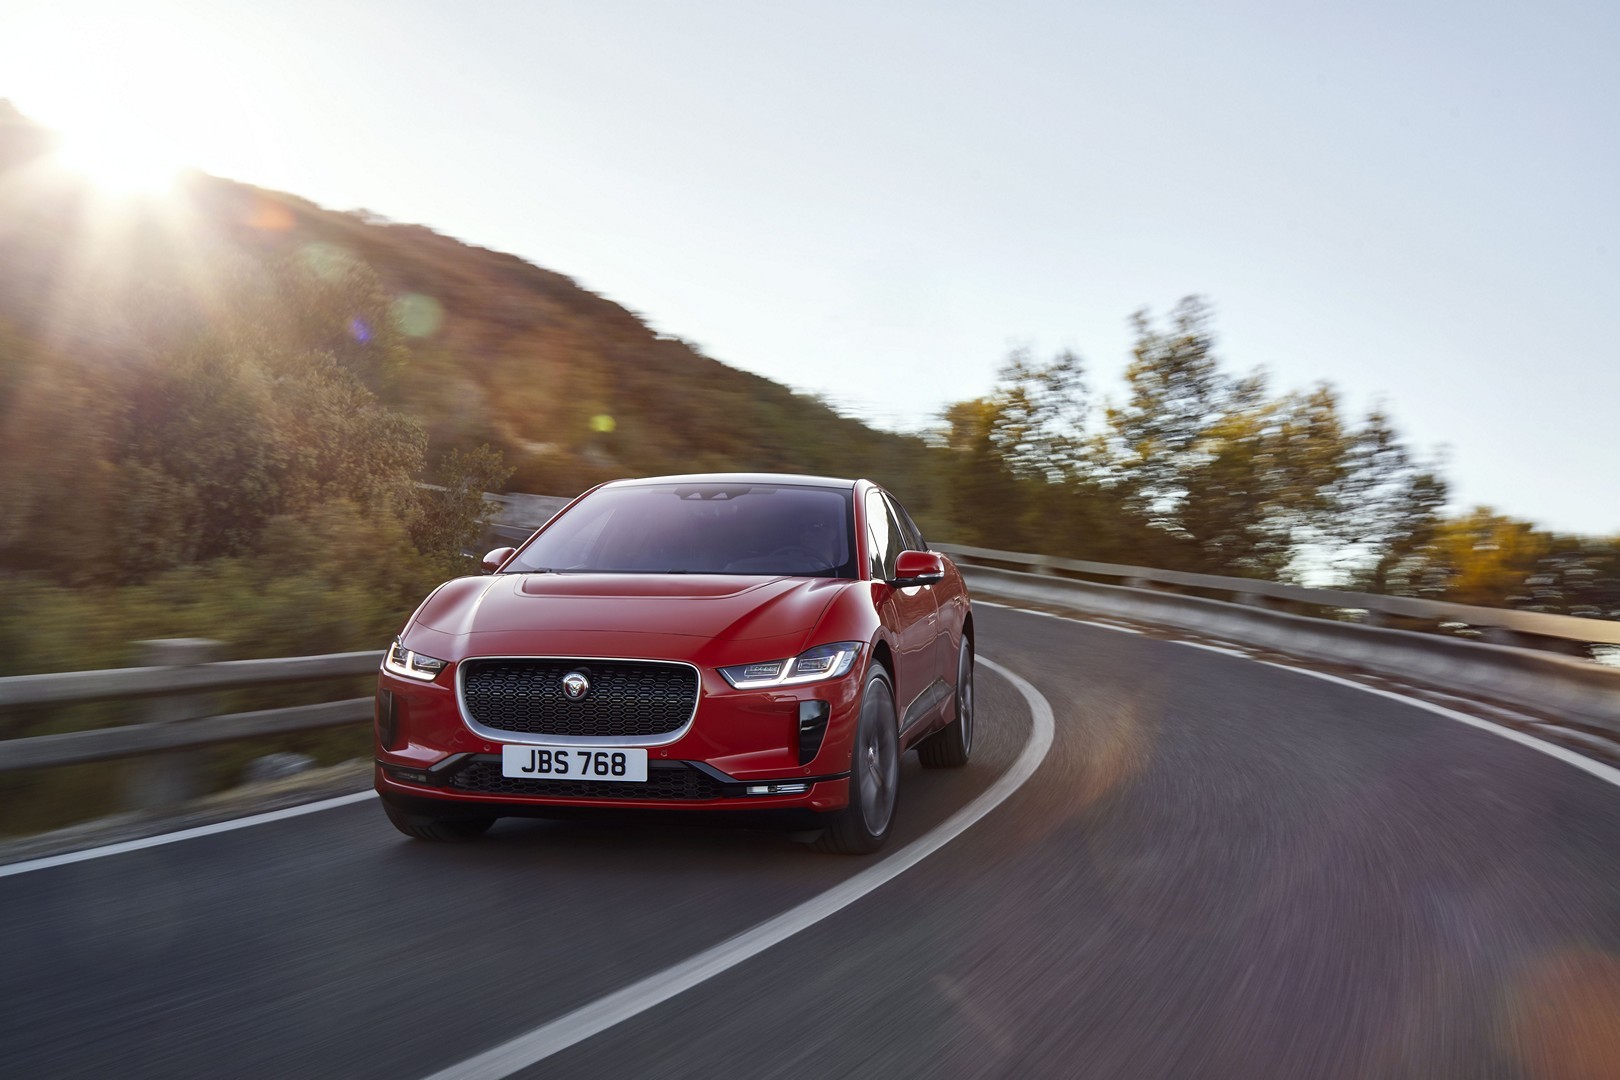 https://s1.cdn.autoevolution.com/images/news/gallery/2020-jaguar-i-pace-update-offers-234-miles-of-range-thanks-to-etrophy-know-how_66.jpg